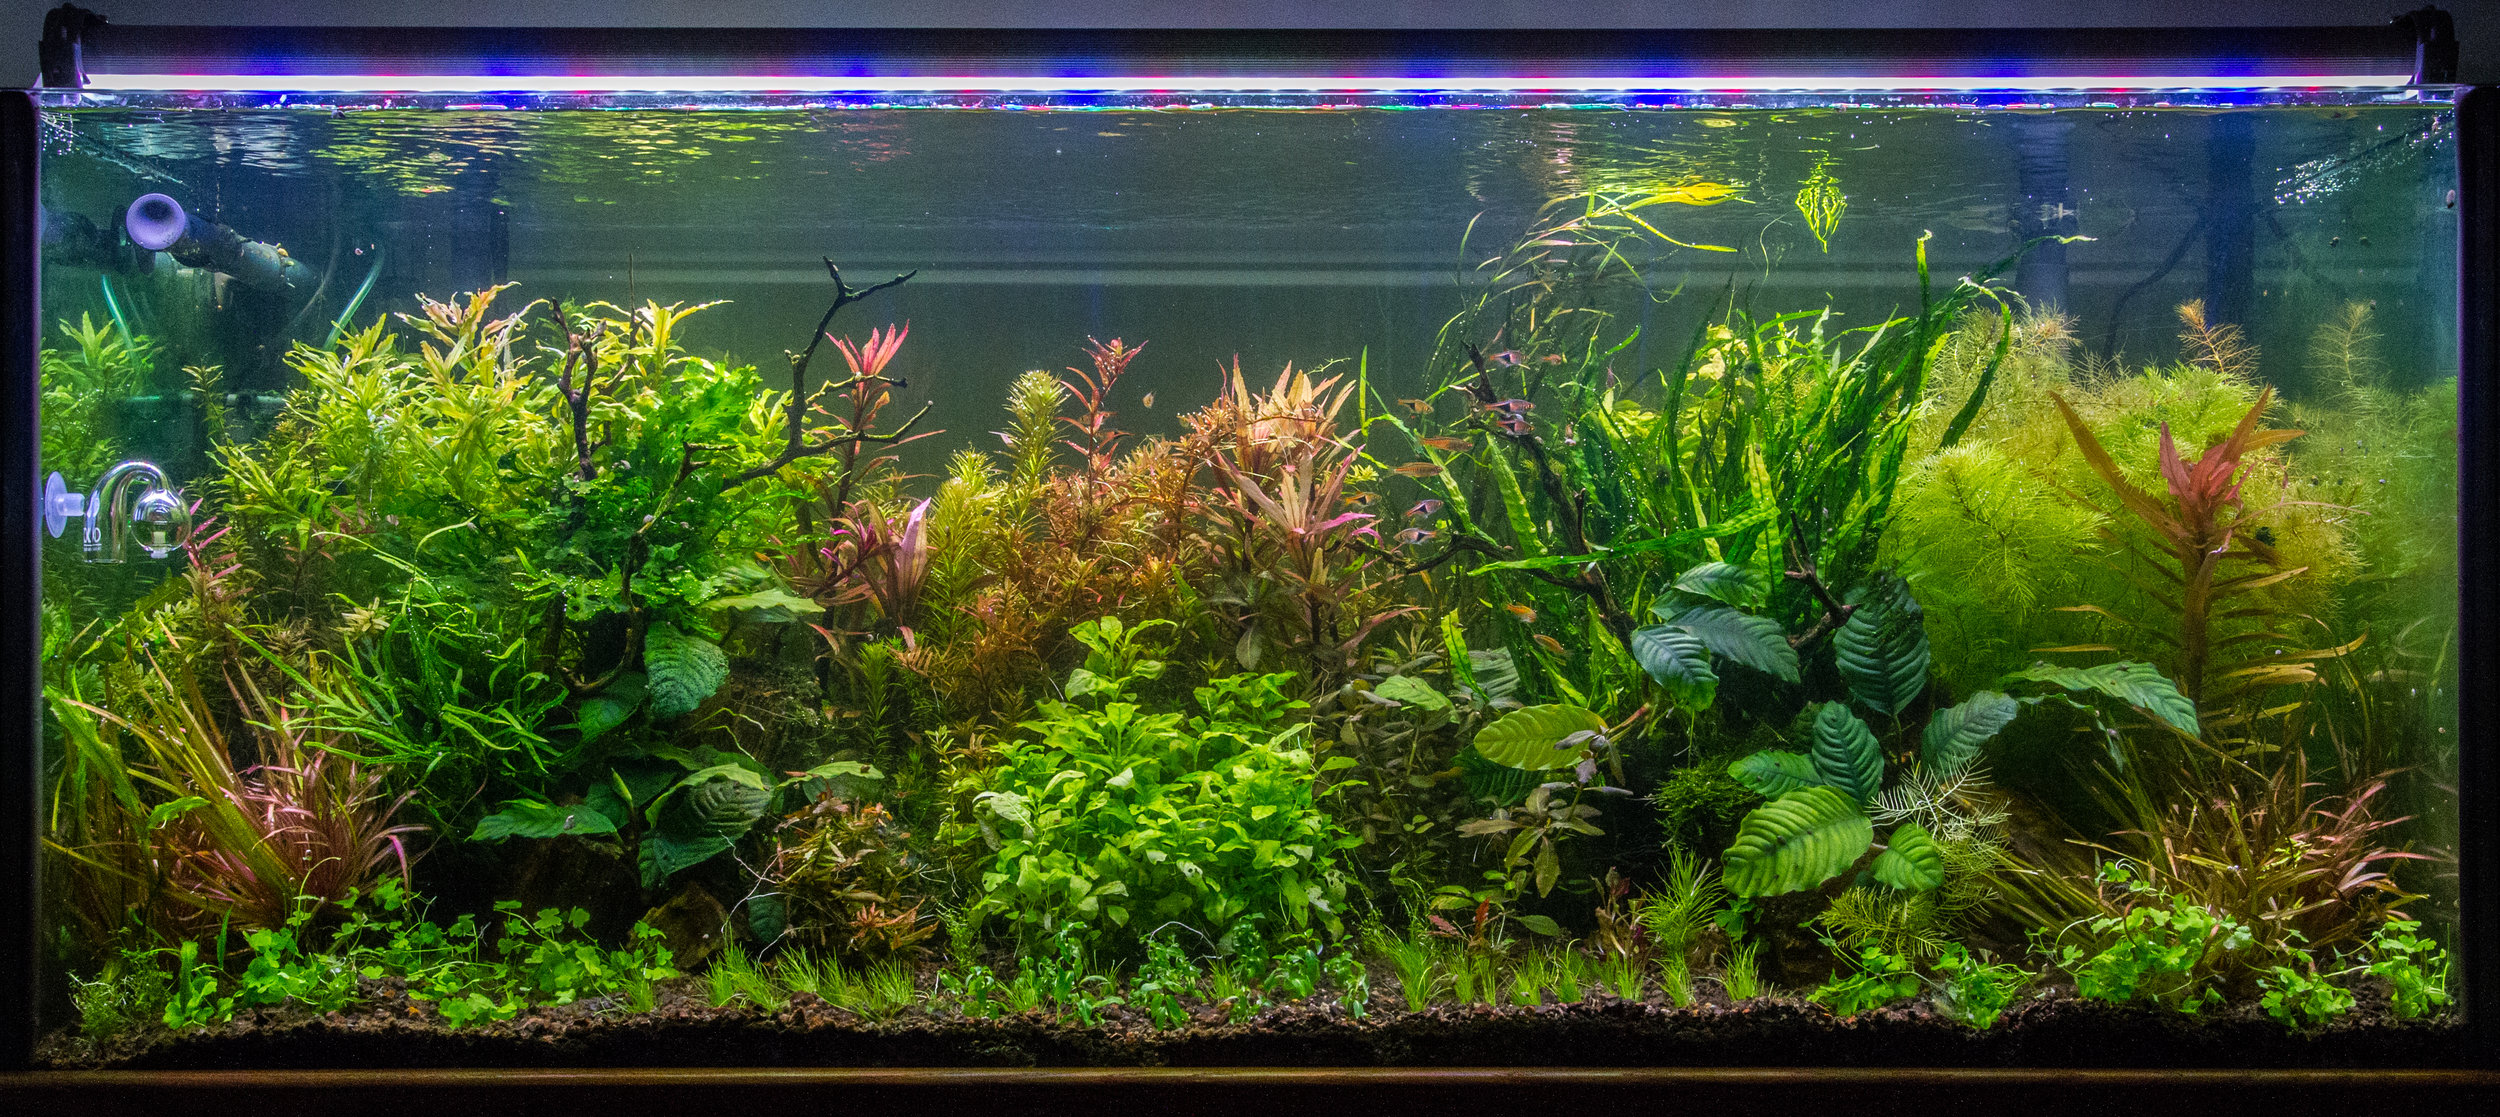 How to Your Tank Without Making a Mess! — Sunken Gardens